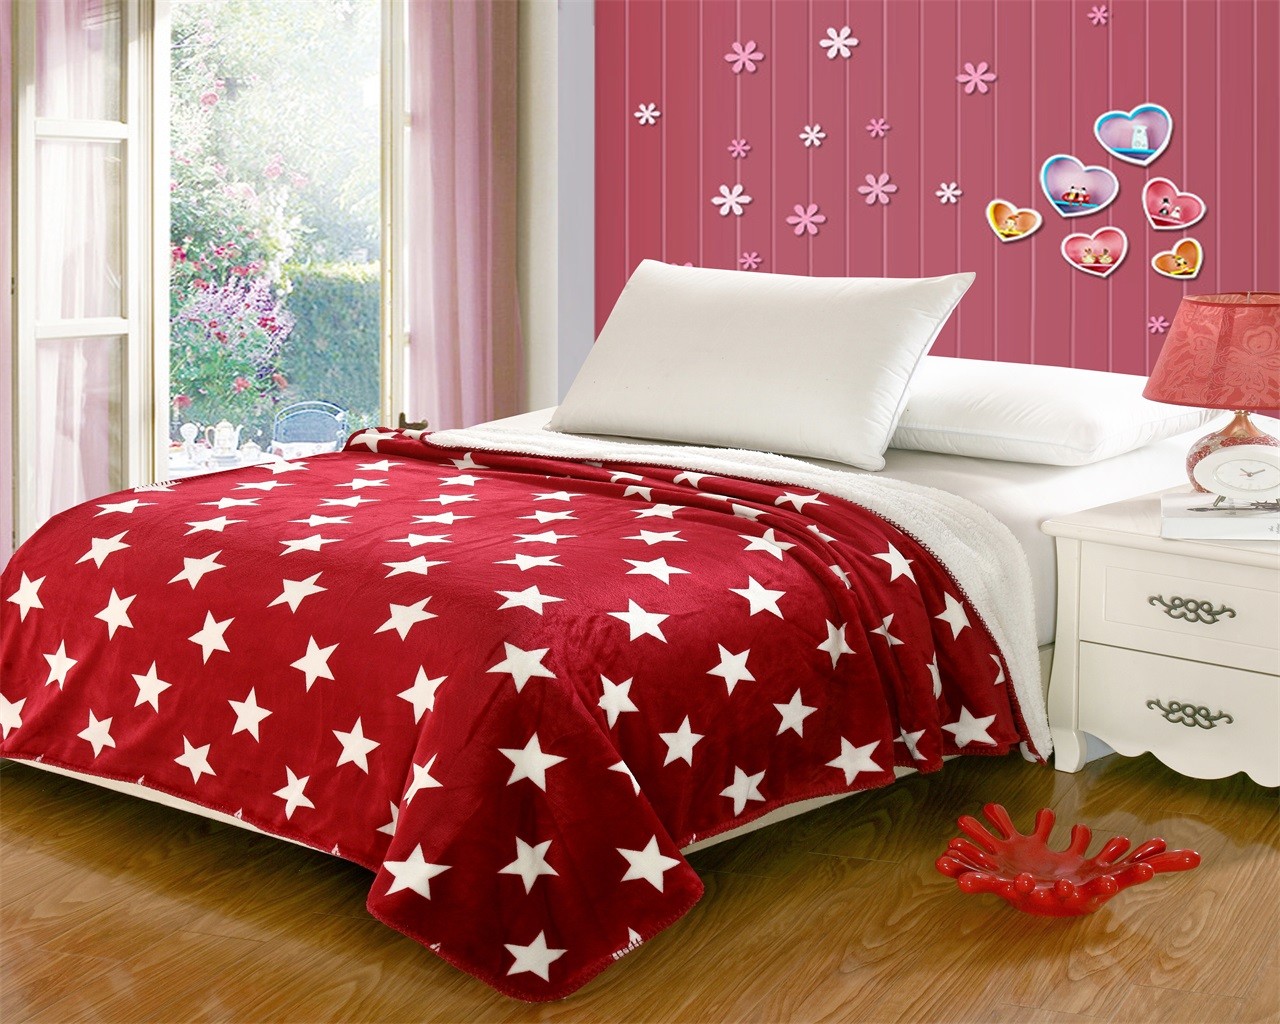 Best Red Five Pointed Star Flannel Fleece Blanket With Customized Designs wholesale